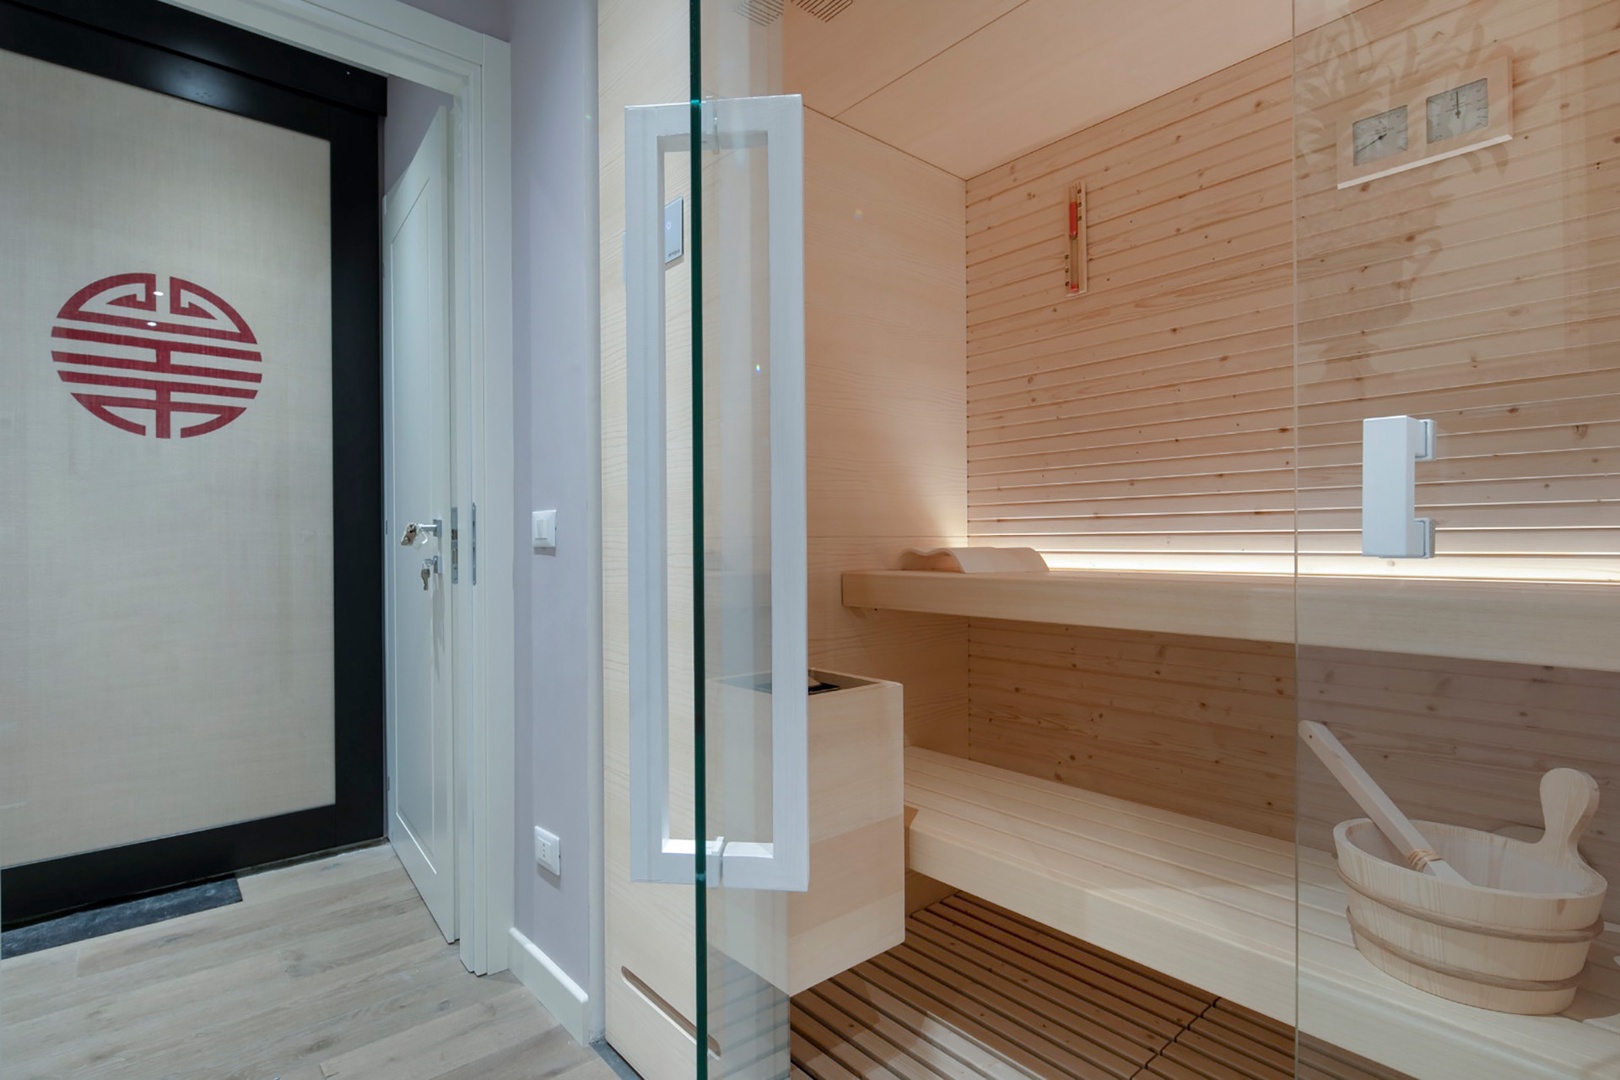 Relax and revitalize in the private sauna.